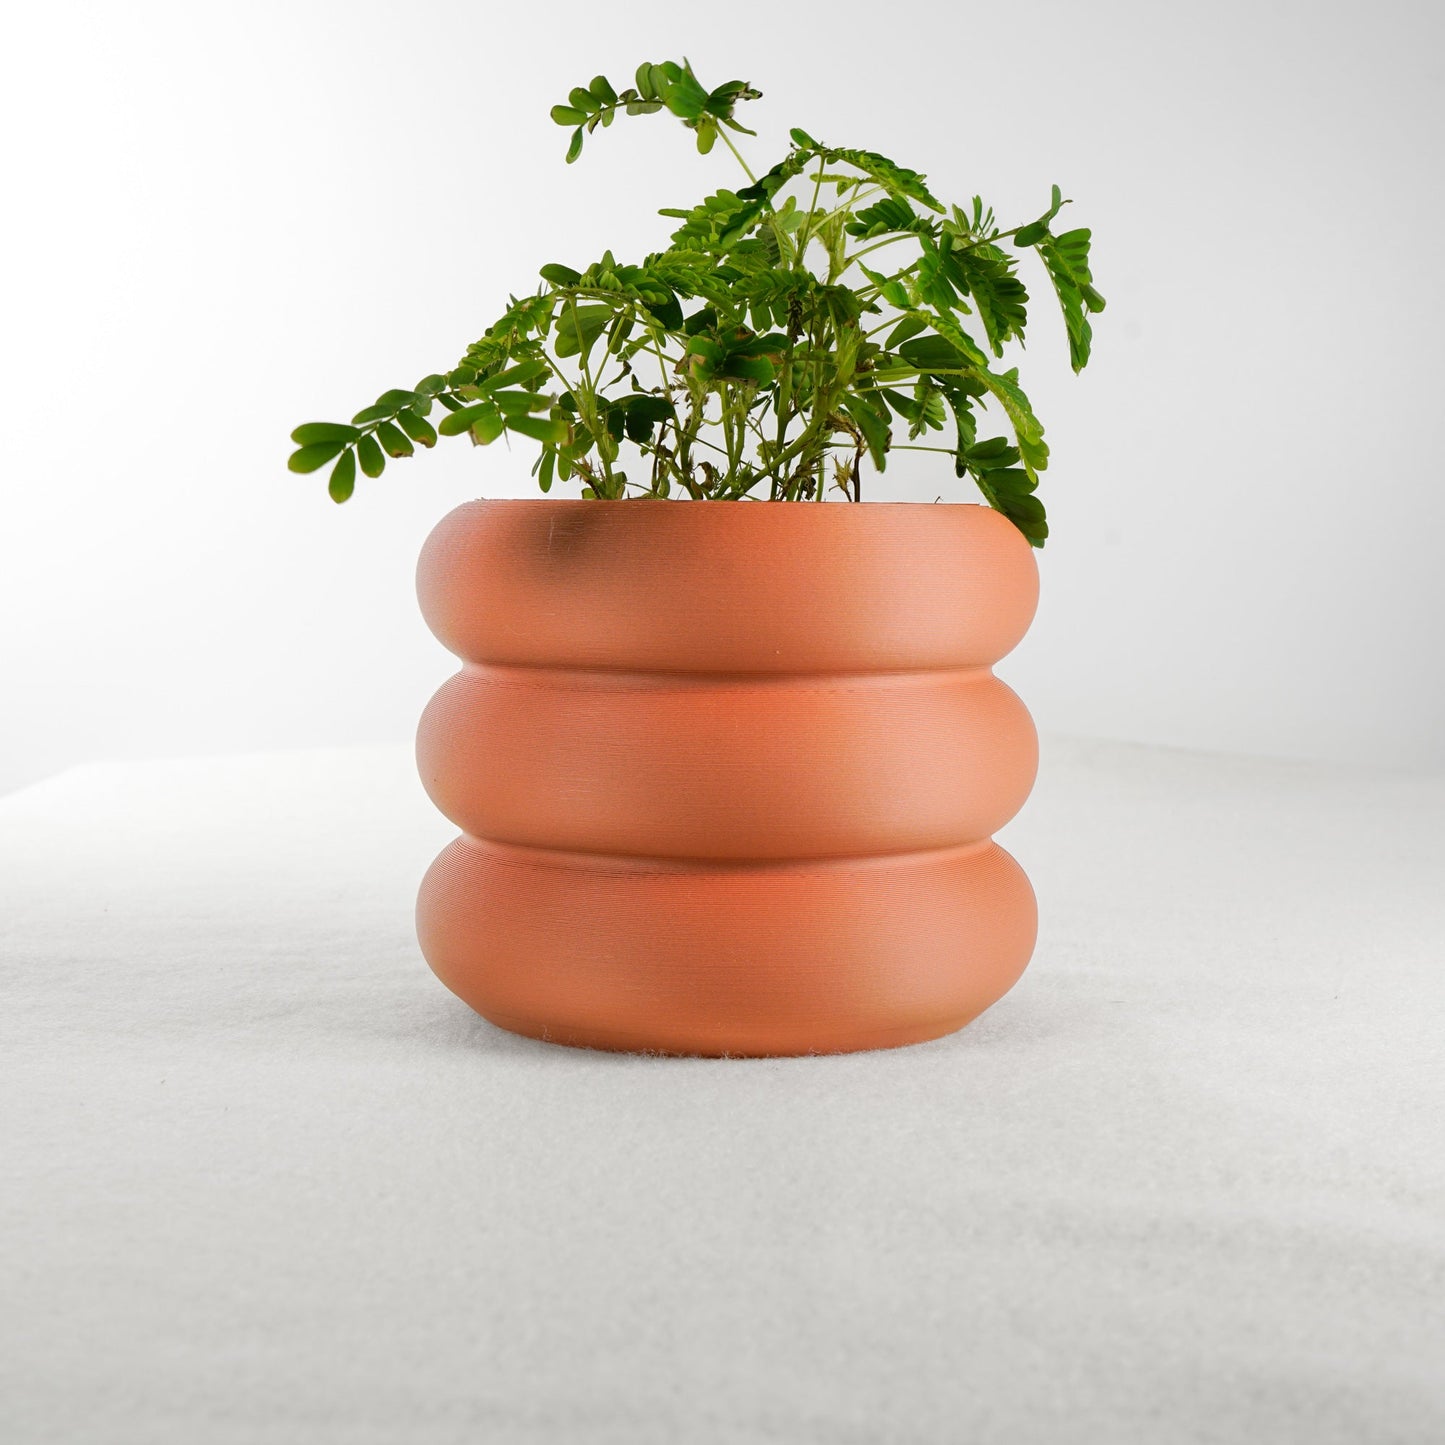 Bubble Planter - Rosebud HomeGoods Terracotta 4 Inch With Drip Tray MODERN HOME GOOD